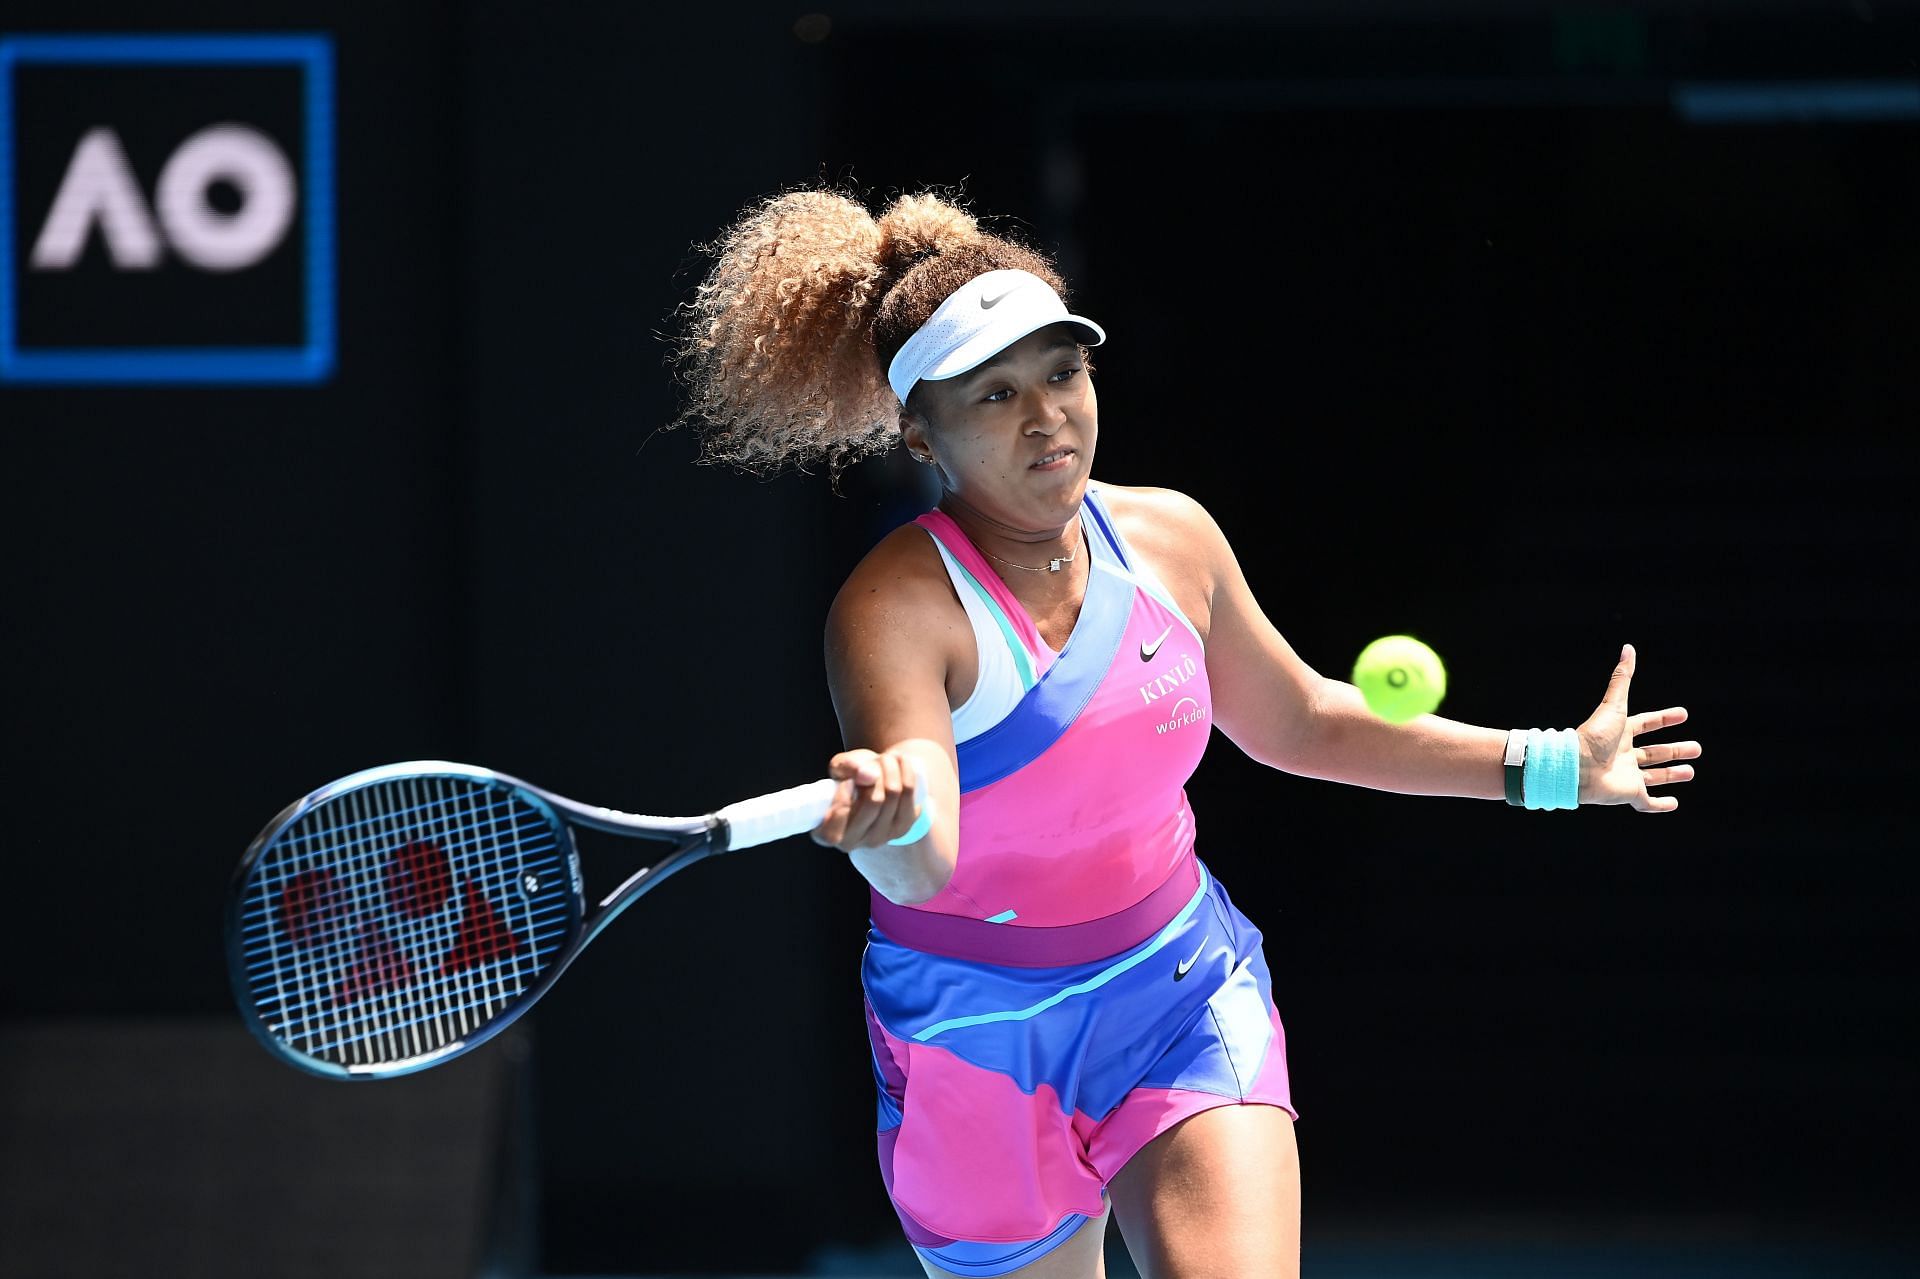 Naomi Osaka faces Madison Brengle for a spot in the third round of the 2022 Australian Open